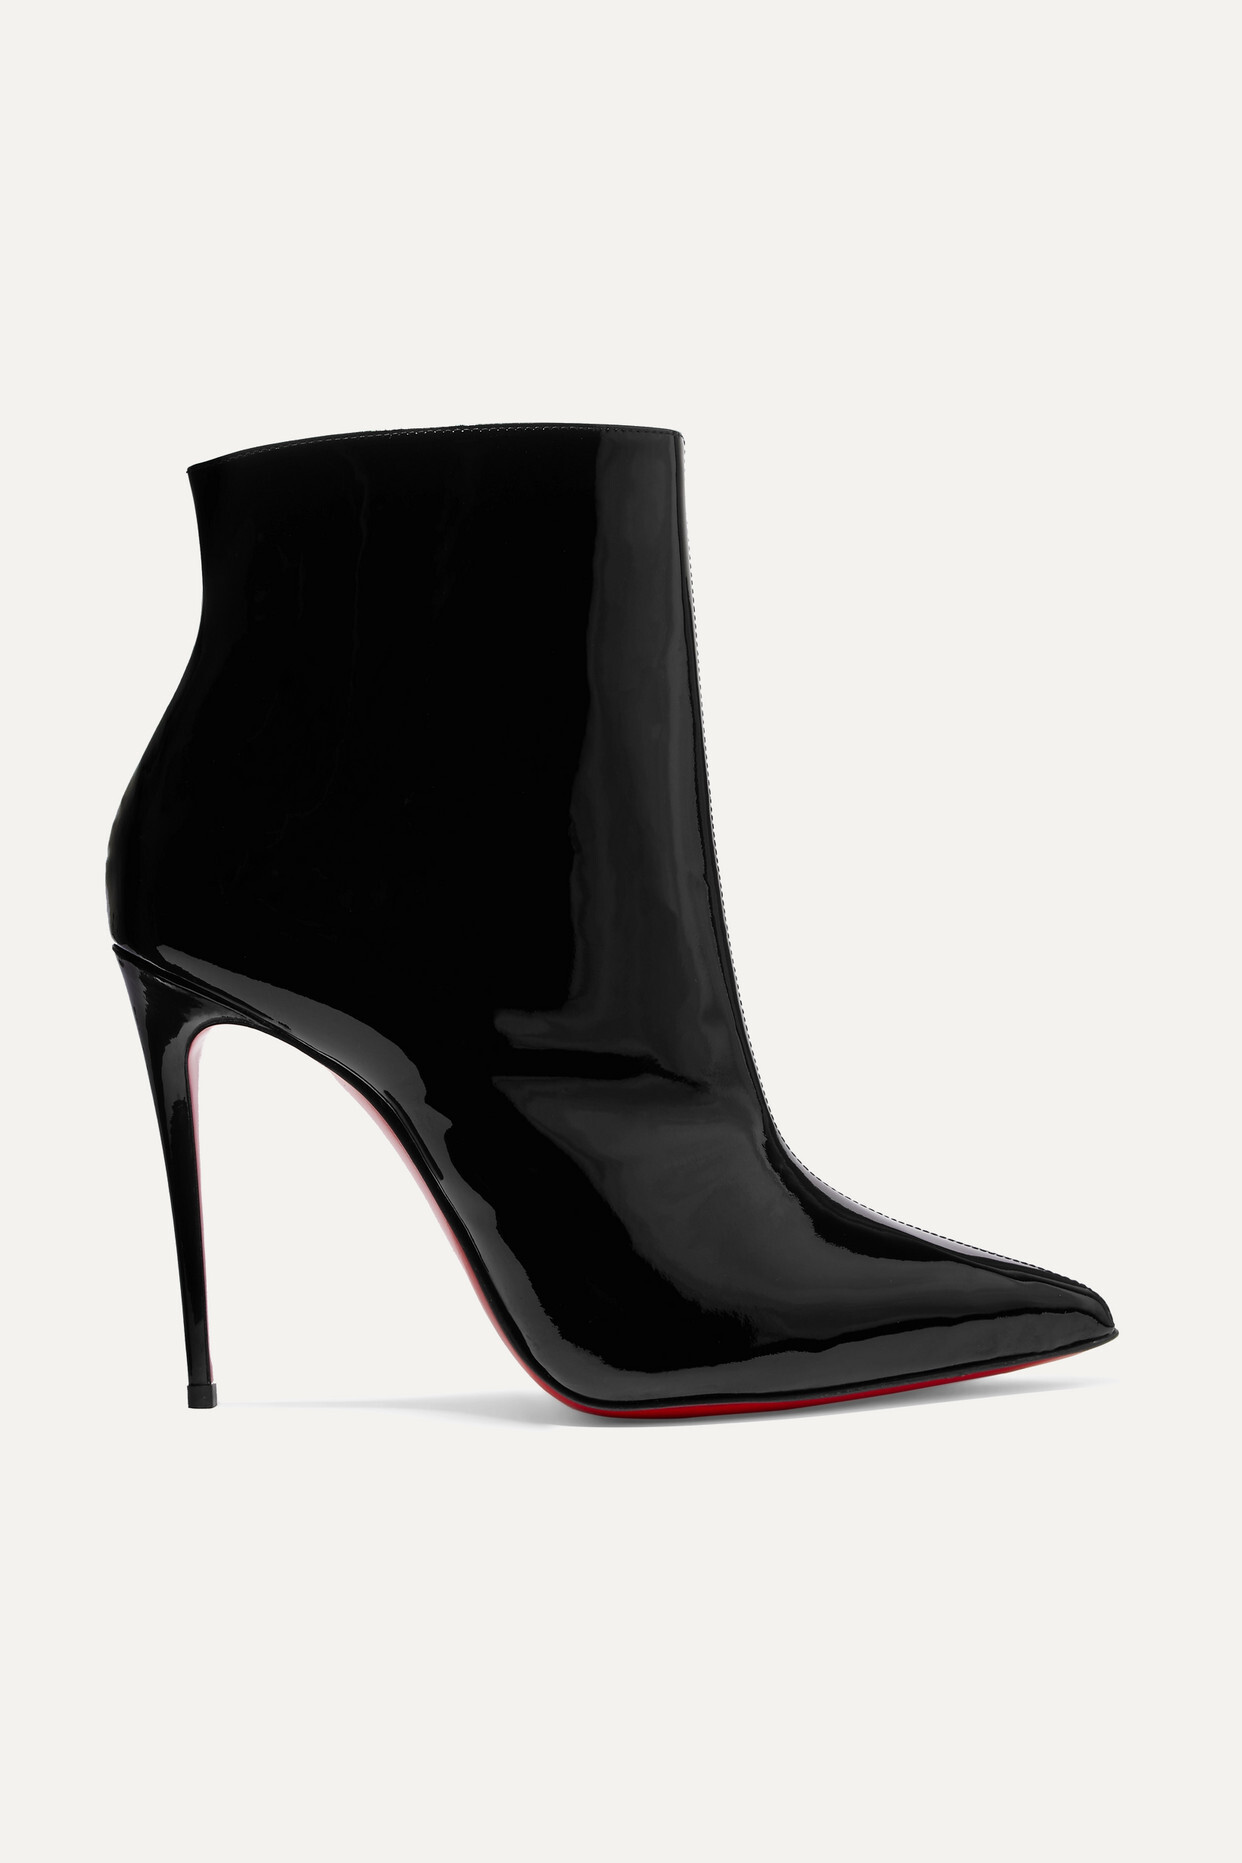 Christian Louboutin - So Kate Booty 100 Patent-leather Ankle Boots - Black